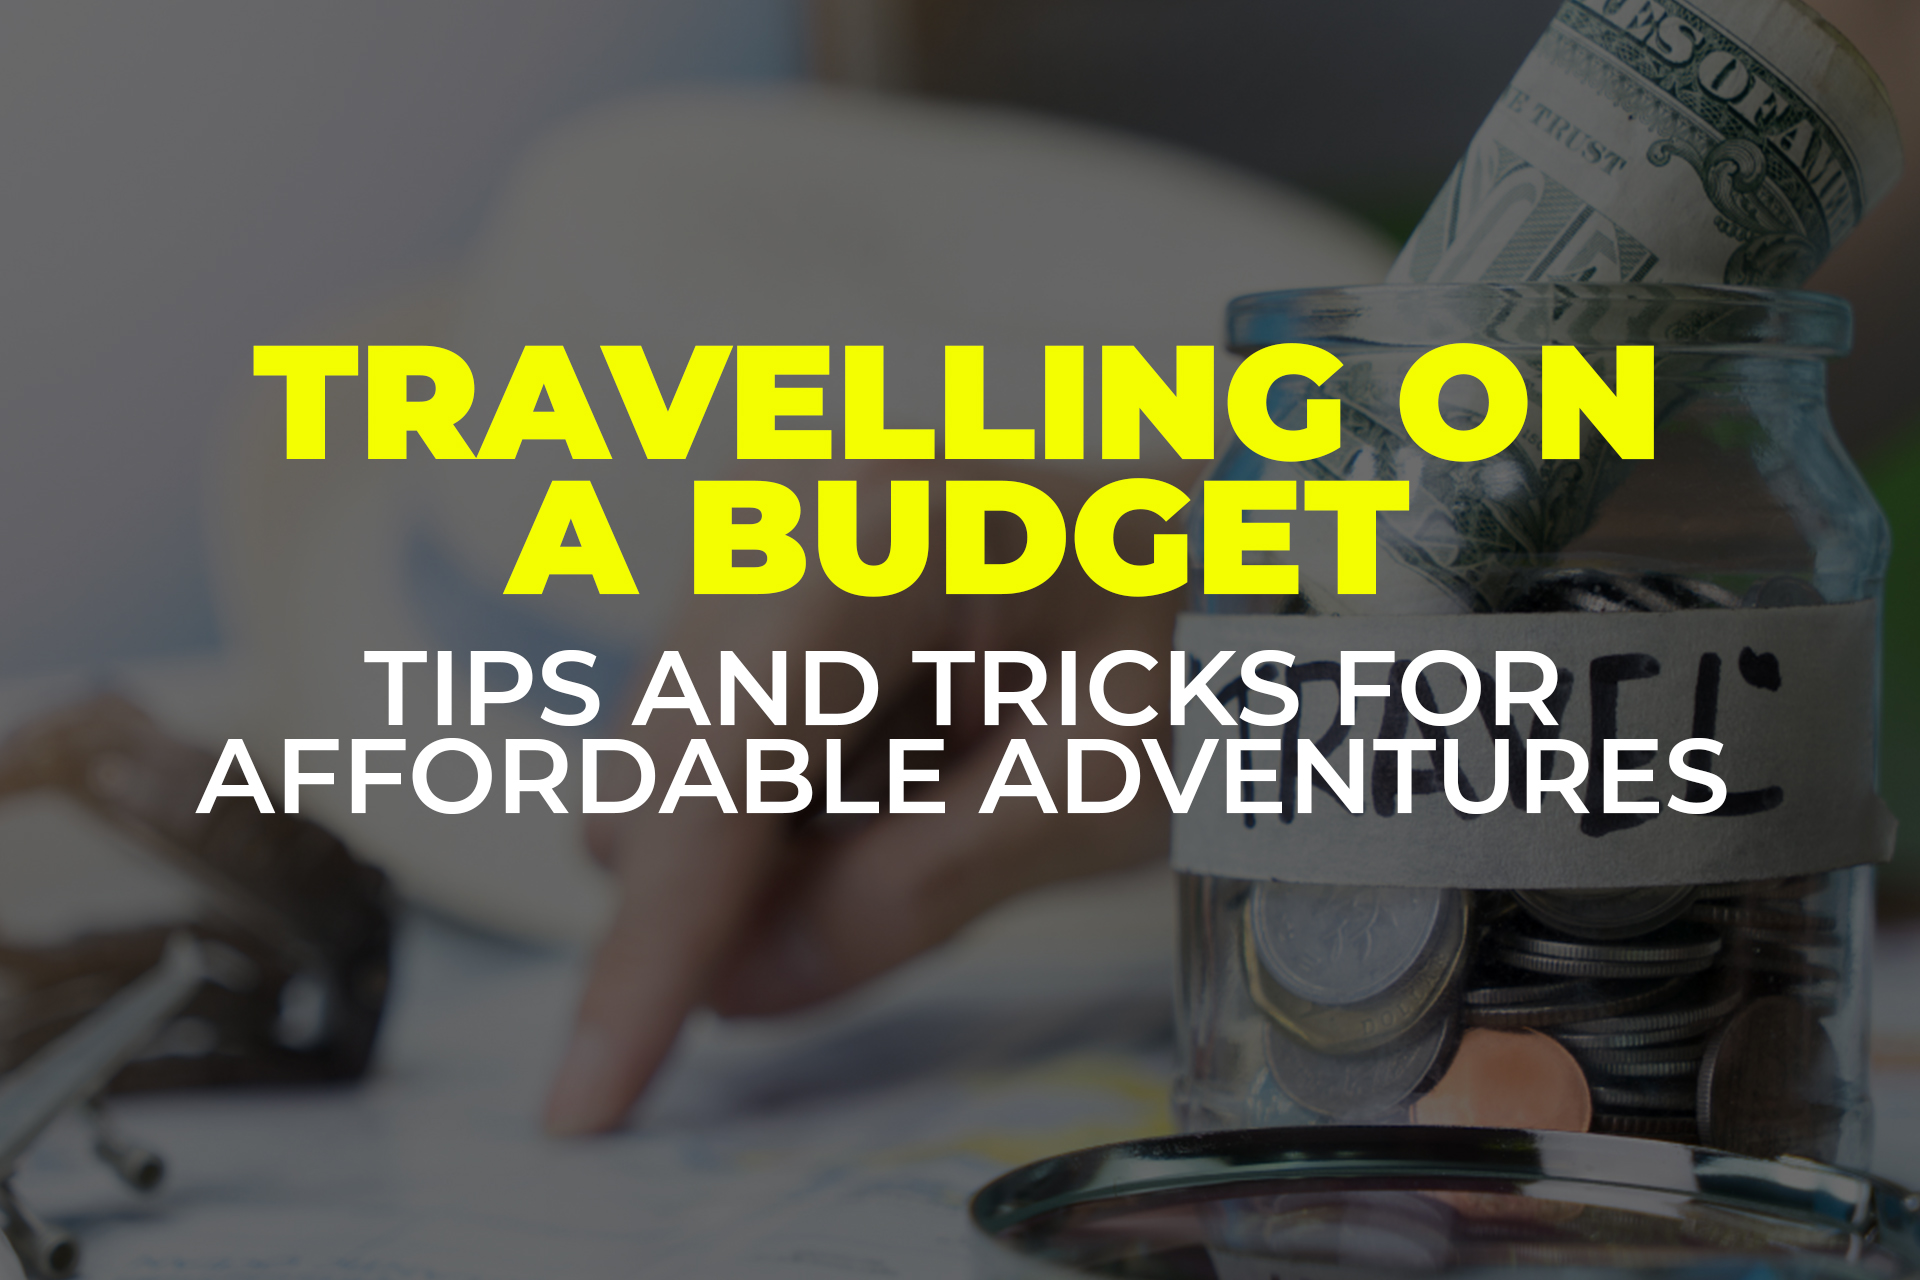 Travelling on a Budget: Tips and Tricks for Affordable Adventures